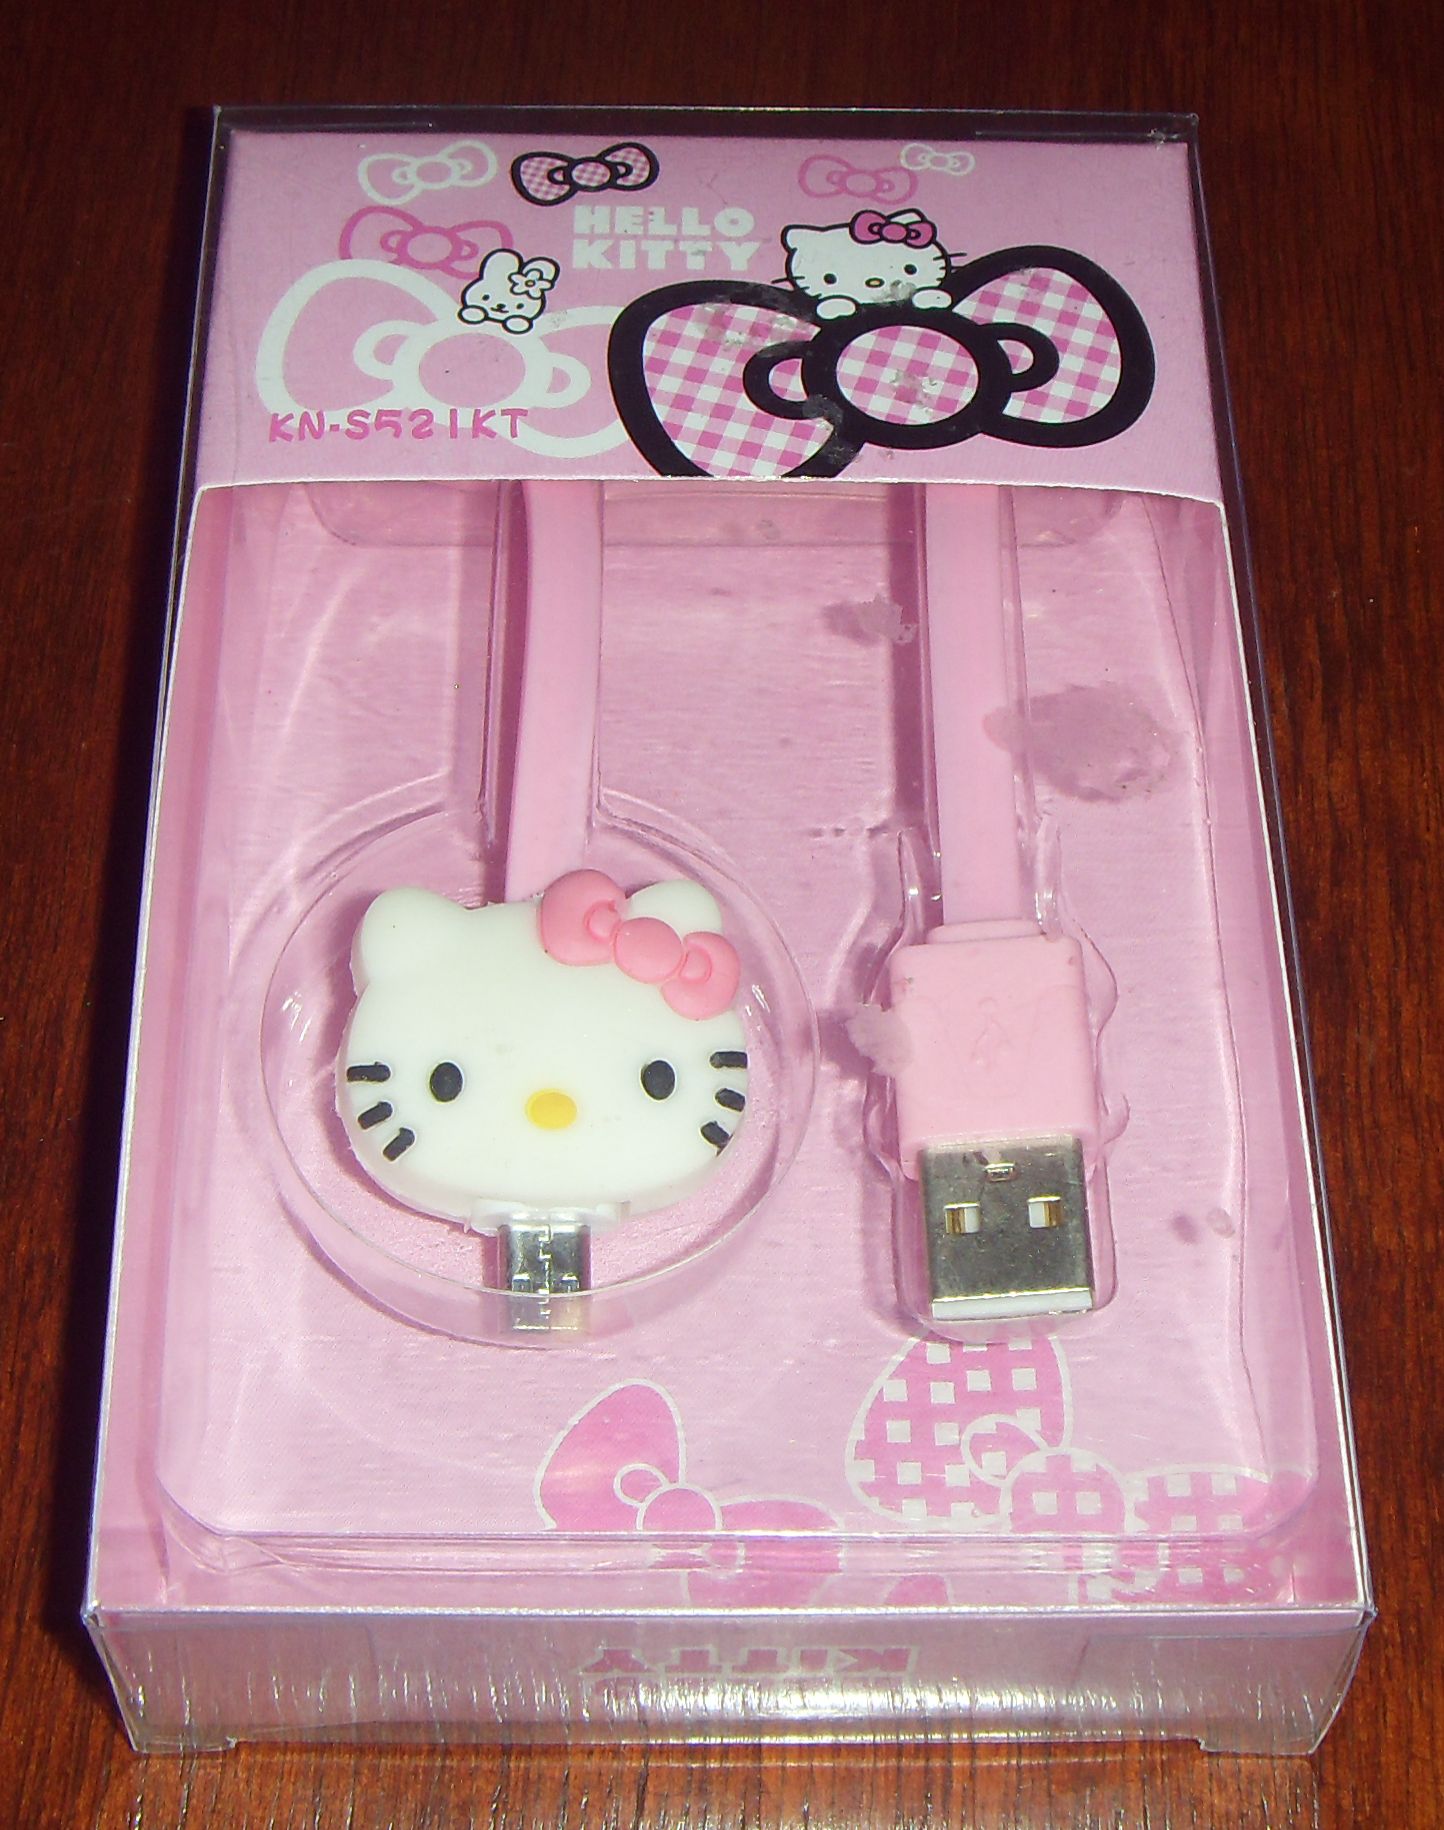 sumsung cute cartoon cable (hello kitty pink).jpg